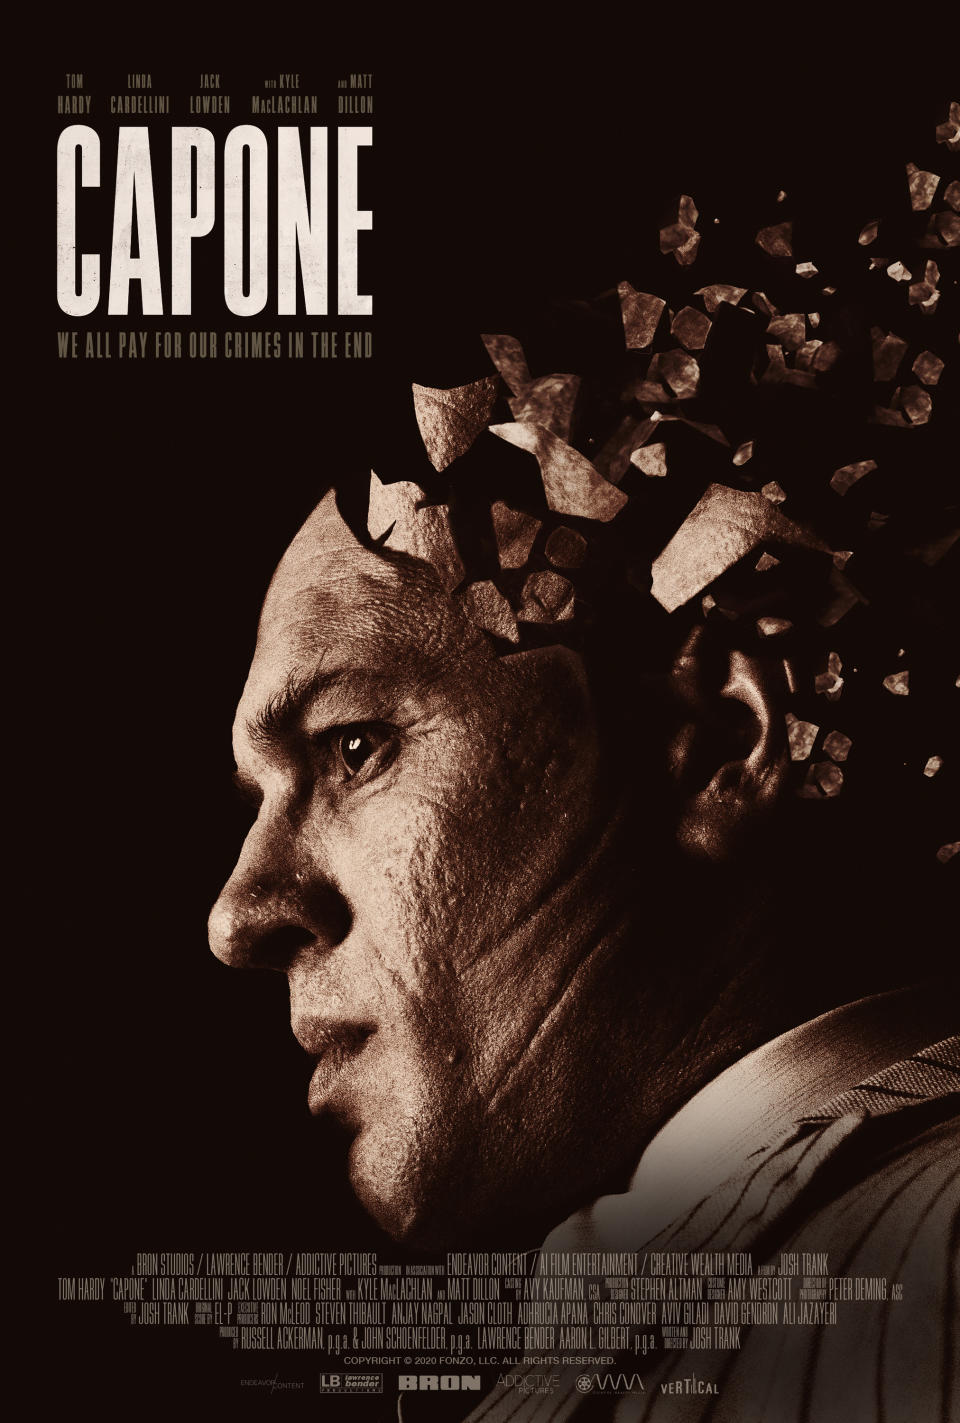 The poster for Capone featuring Tom Hardy as the Prohibition-era gangster. (Vertical Entertainment)